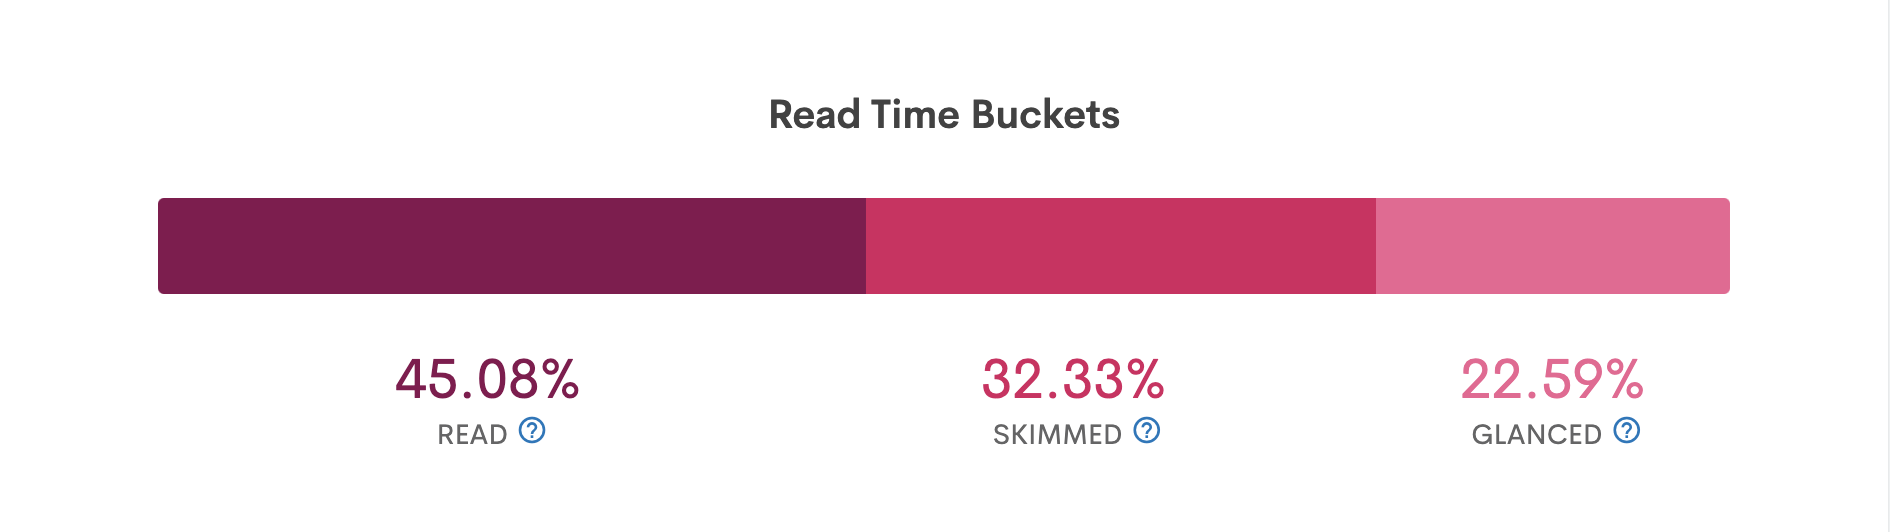 Read time buckets in Staffbase's email designer, with time read, skimmed, and glanced